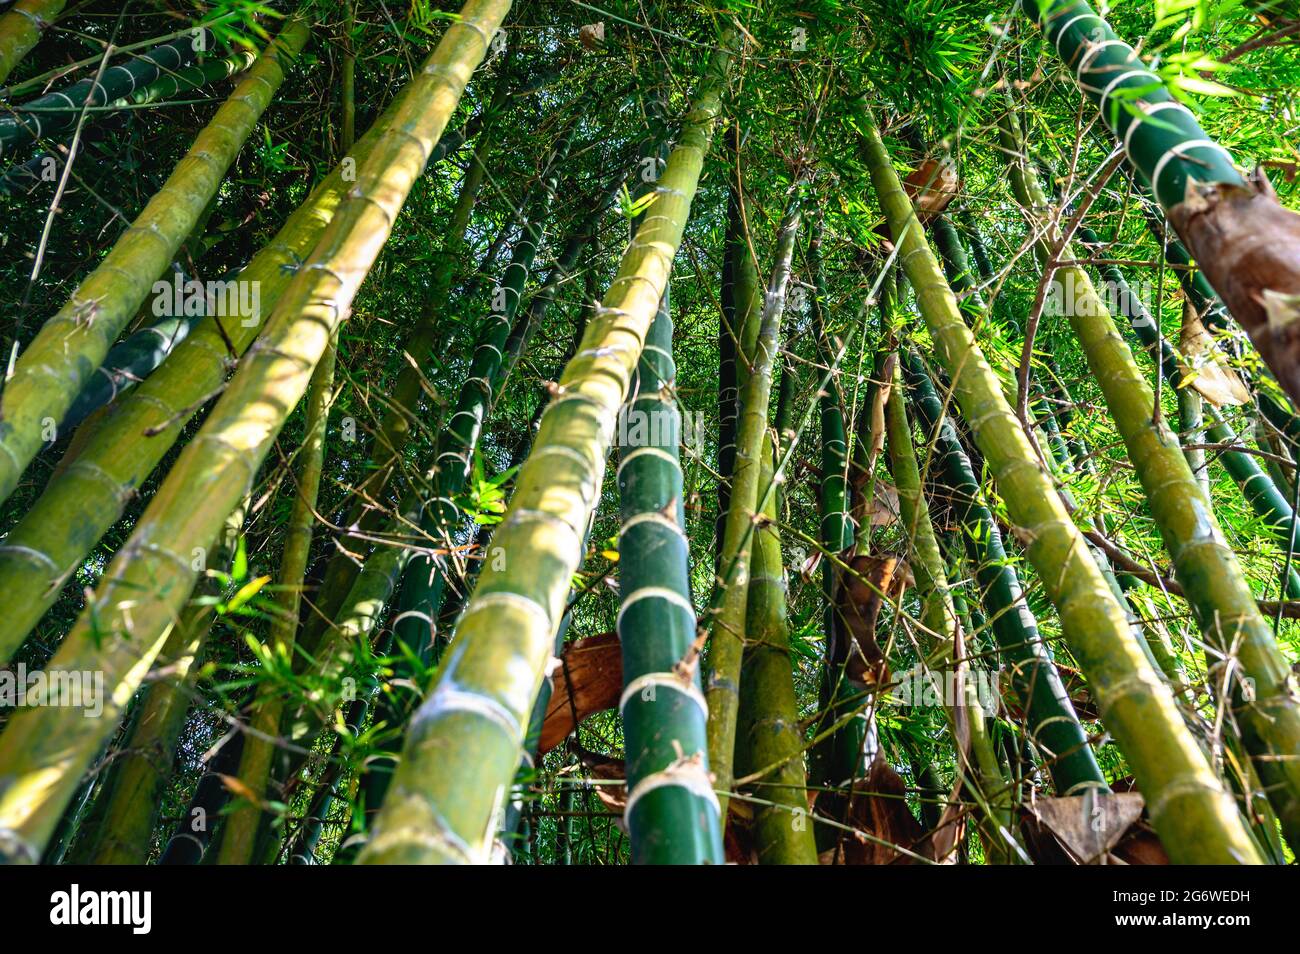 Shot from the bottom of the Guagua or bamboo tree plant in a plantation. Green, raw tree trunk with leafs in the background. Stock Photo